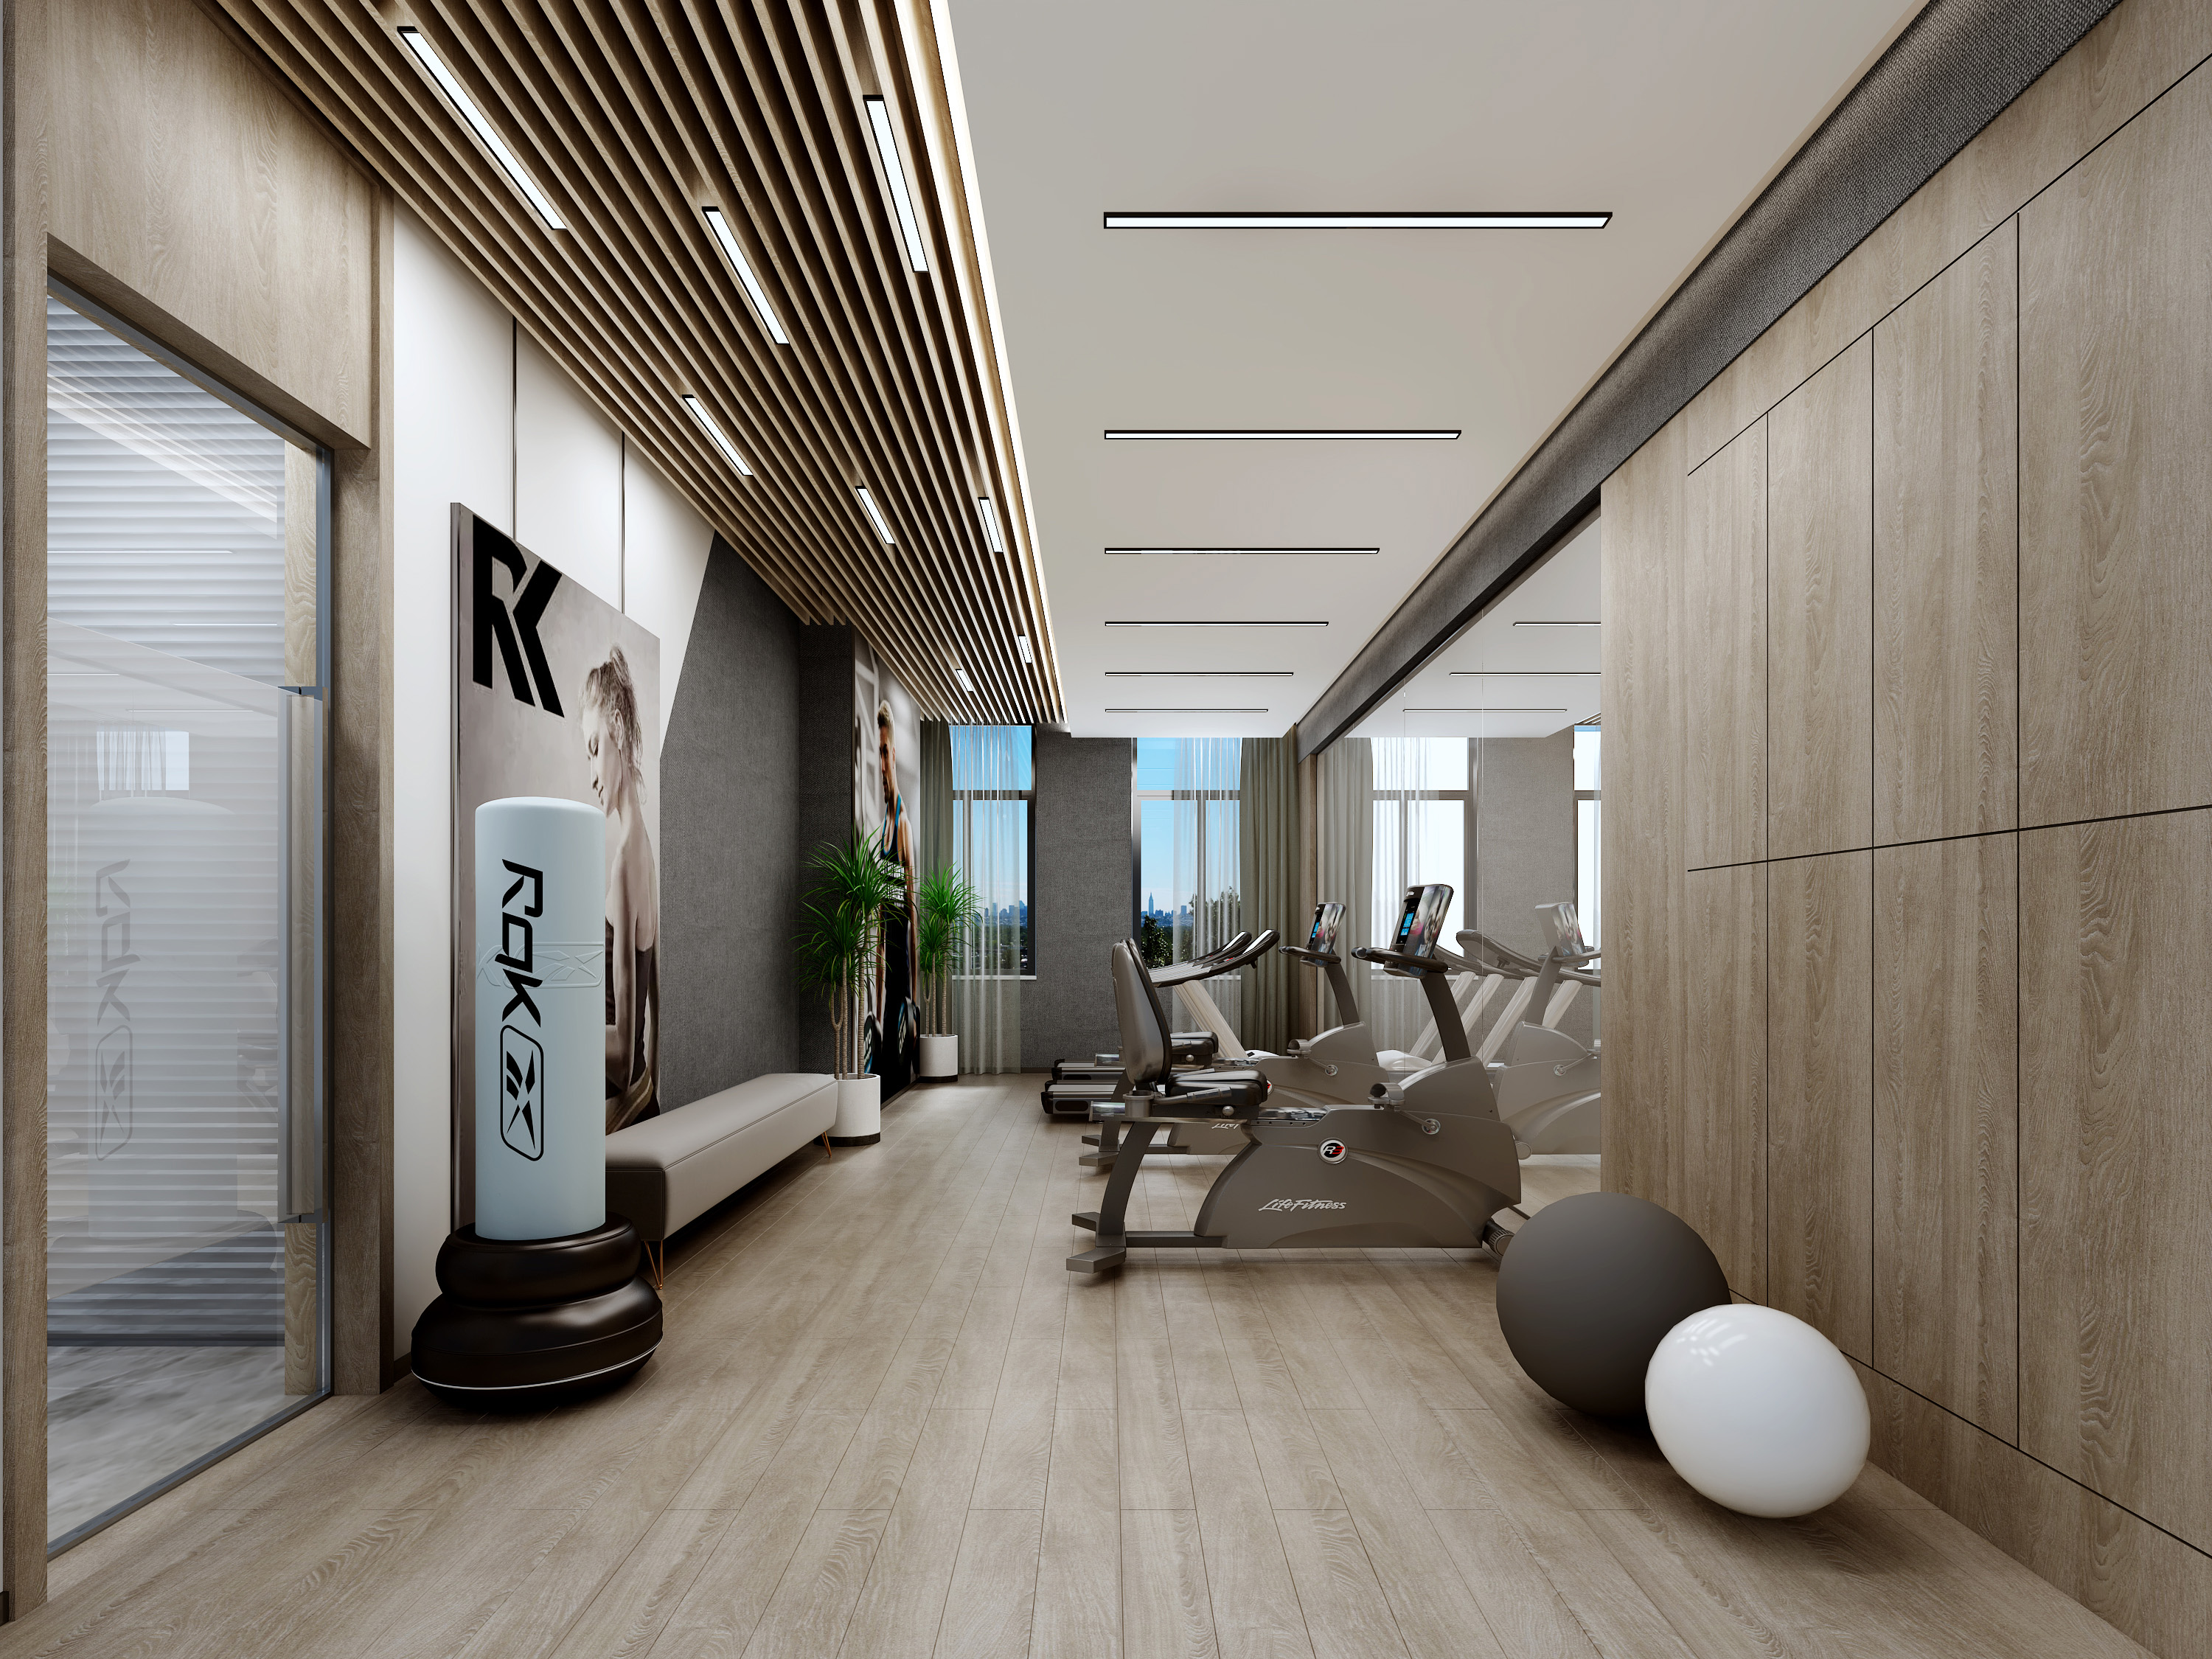 Reasonably arrange the gym equipment to make the Gym more beautiful;Gym's interior decoration